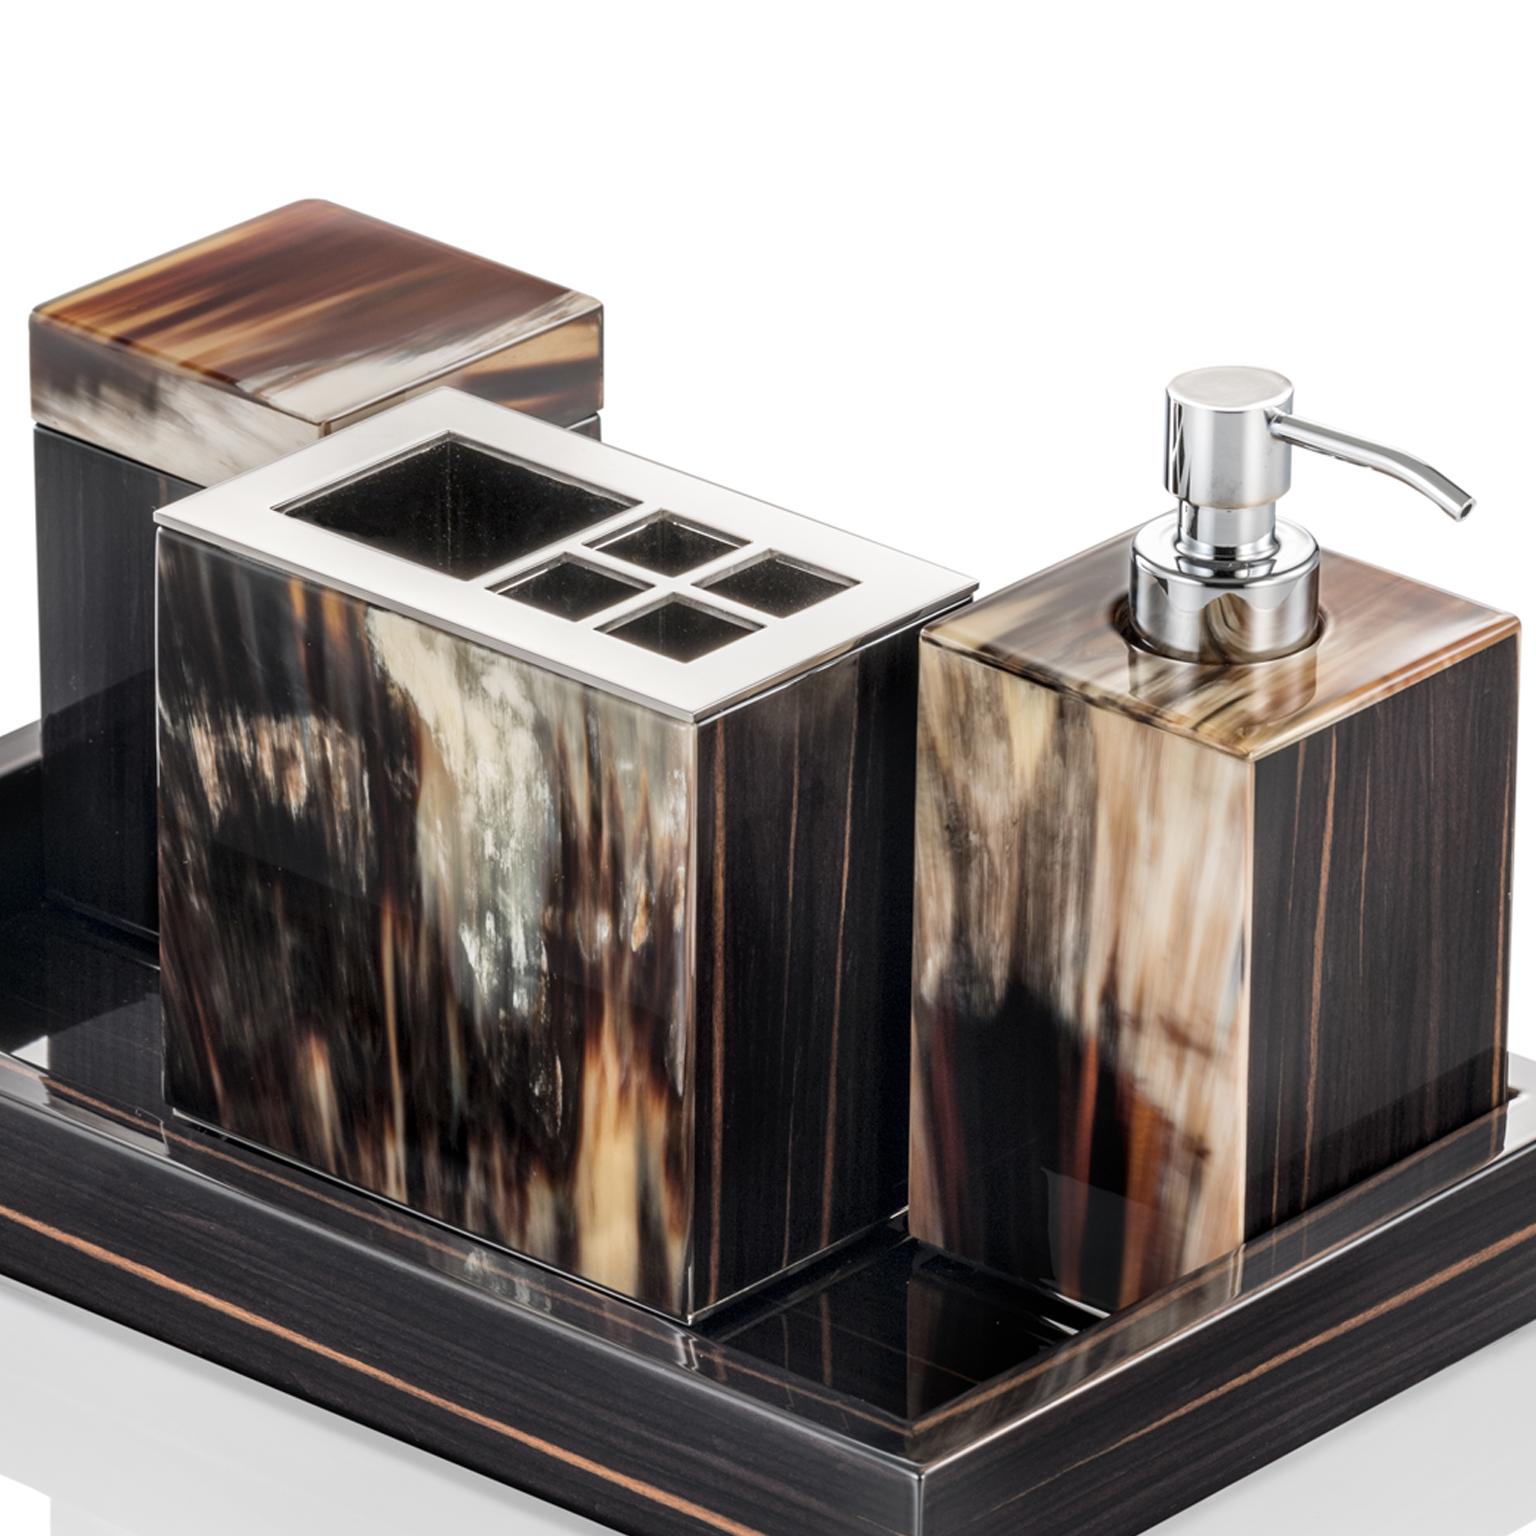 Minimalist yet decorative, the Iris toothbrush holder is a must-have complement to an elegant bathroom. Crafted of glossy ebony veneer and chromed brass, the sleek design is embellished by unique inlays in Corno Italiano boasting dreamy